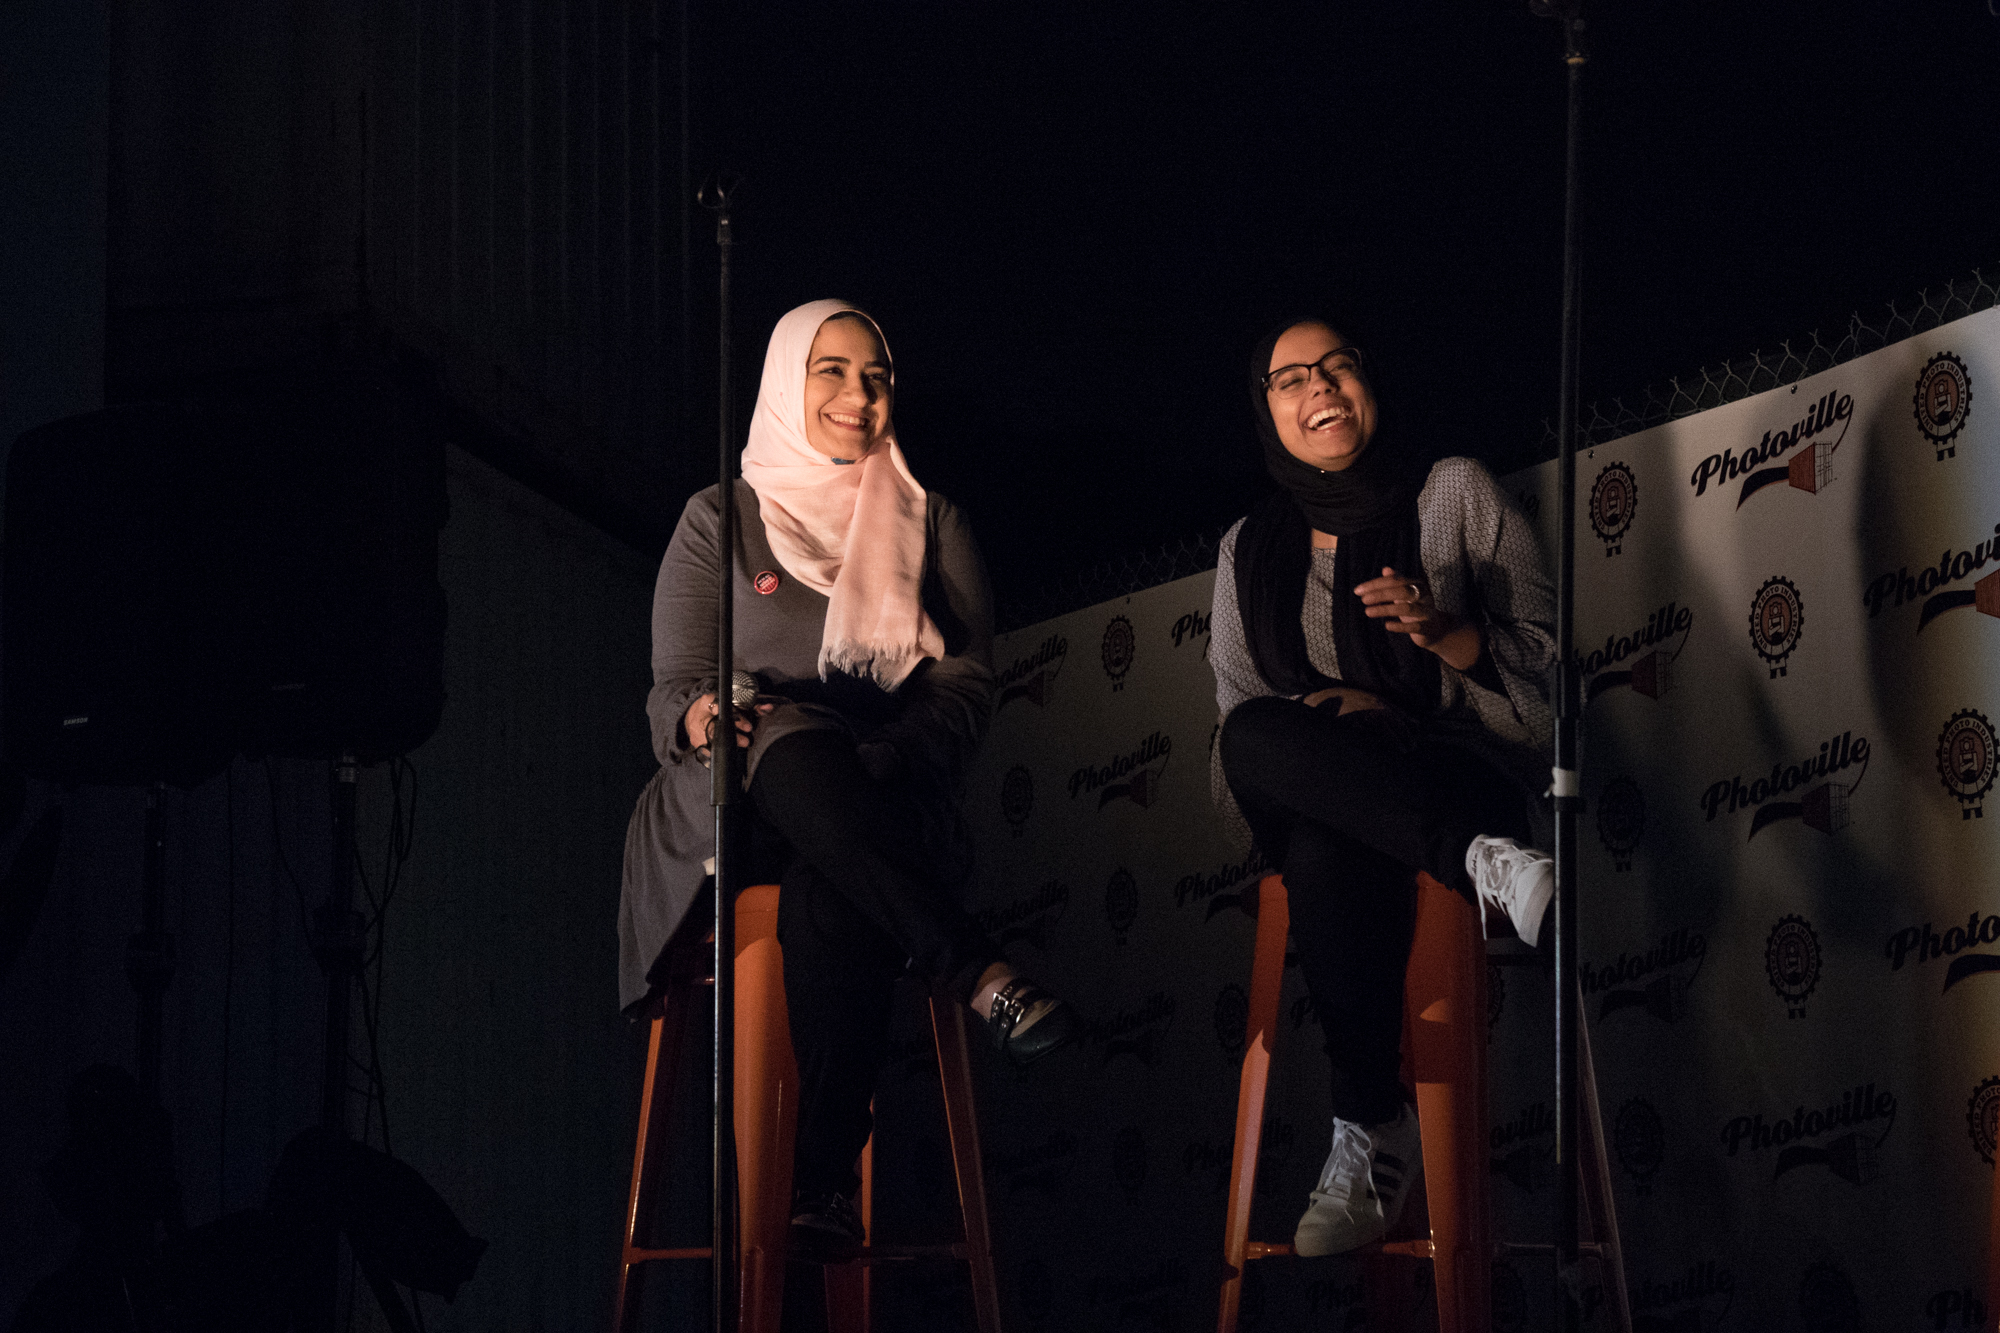  Dina Sayedahmed (left) and Hamna Saleem crack up during a Q&amp;A with Ed Kashi after screening Hijabi World at Photoville's Opening Night. (Photo by Stephanie Khoury) 